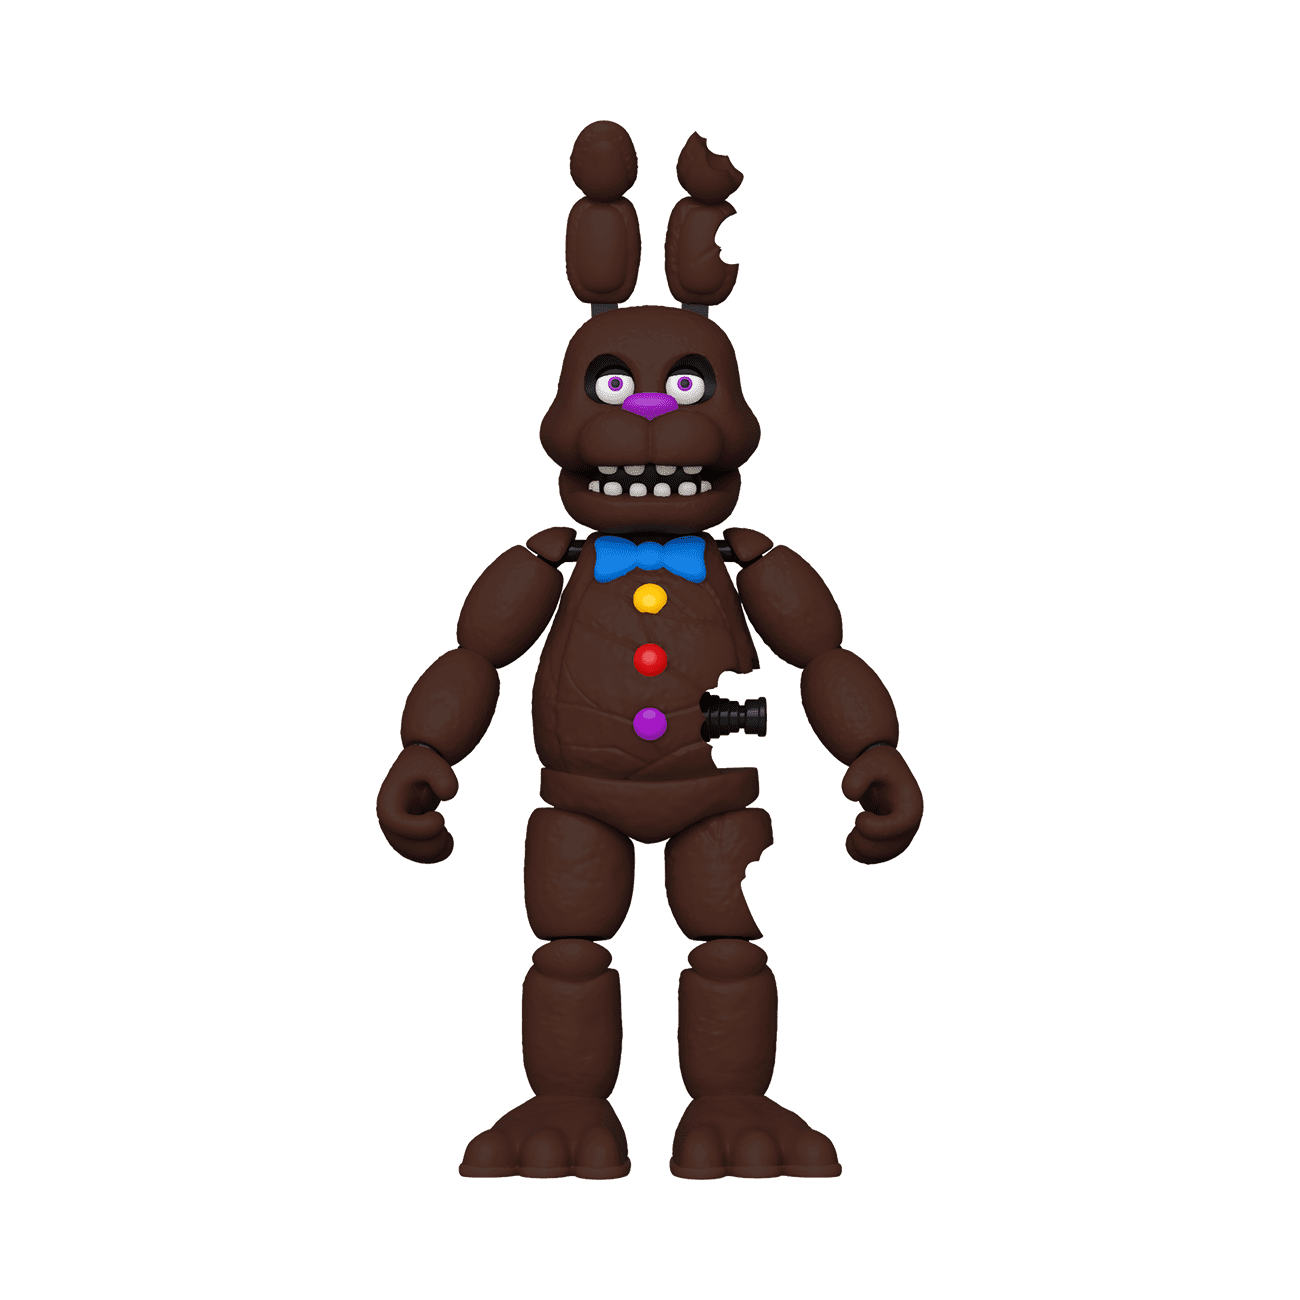 Five Nights at Freddys x 4 Figures Moving Arms & Swords 